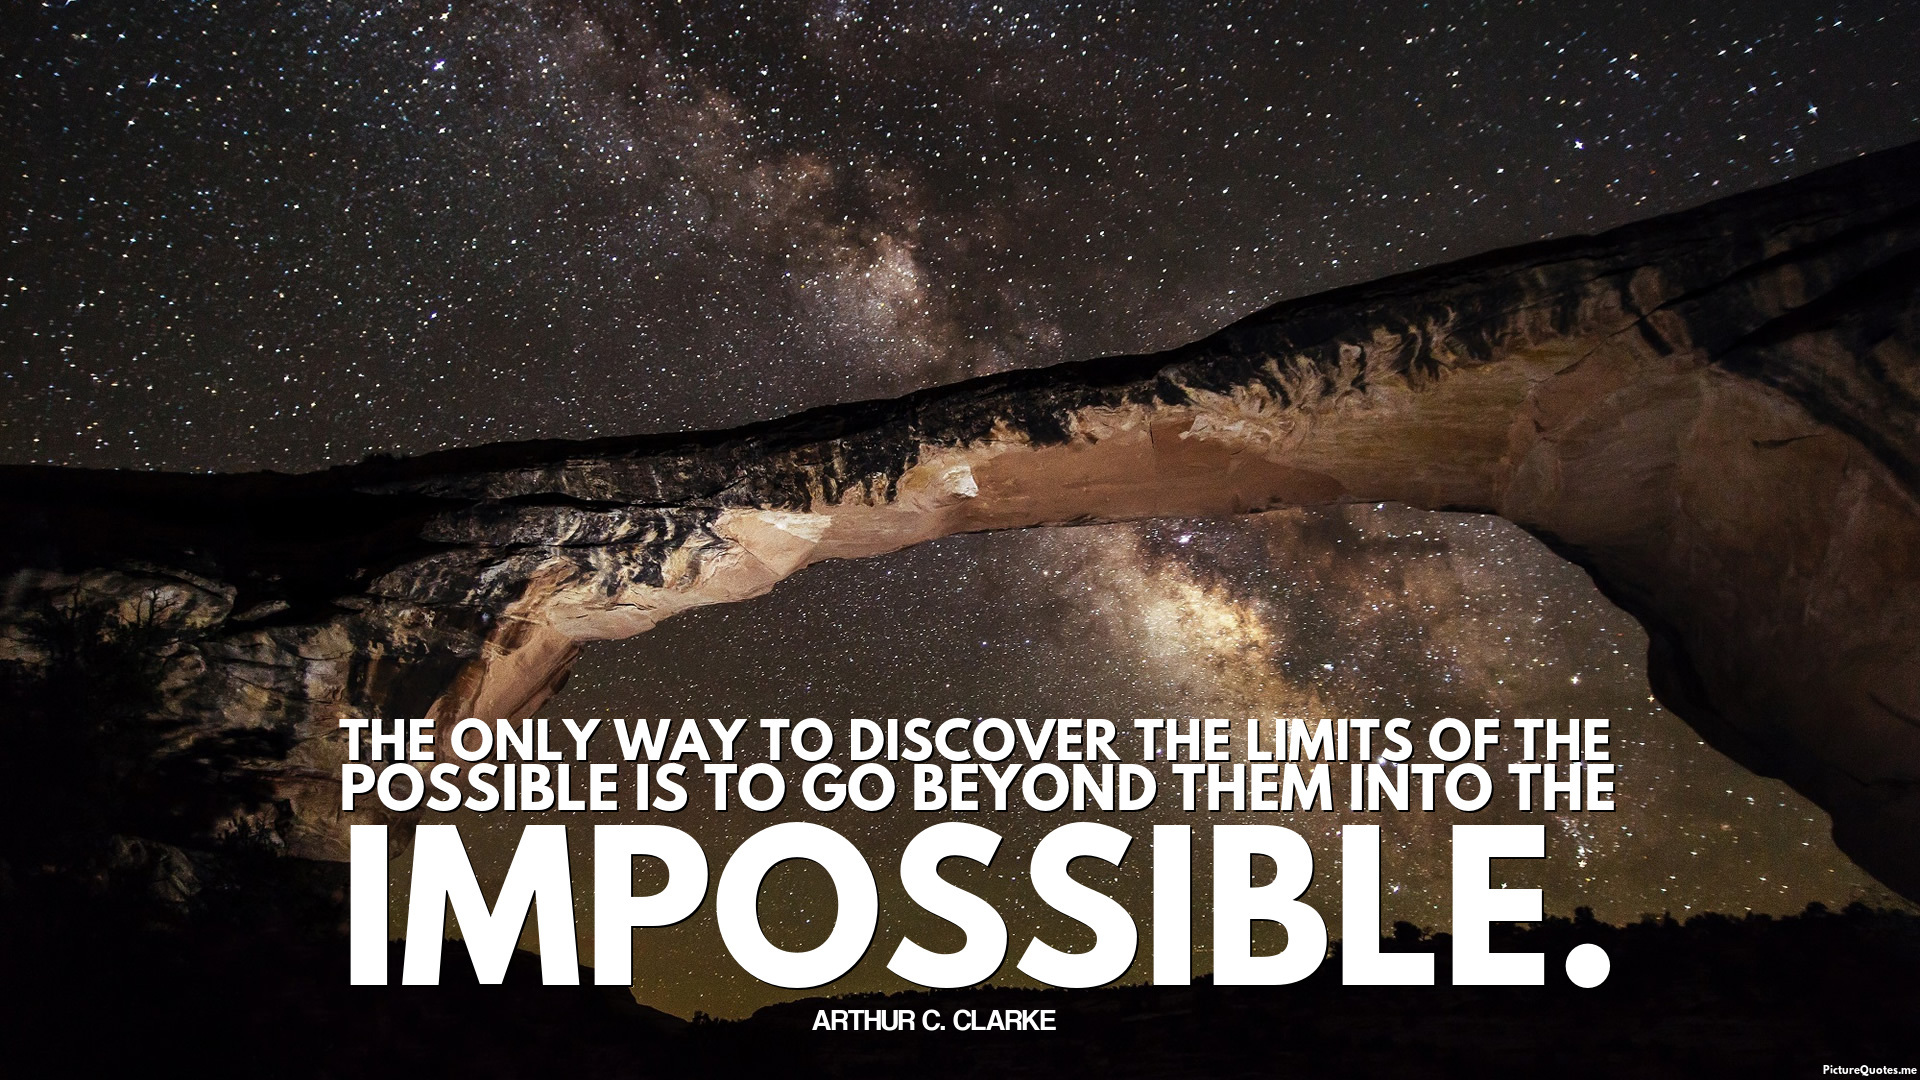 arthur_c__clarke_quote_the_only_way_to_discover_the_limits_of_the_possible_is_to_go_beyond_them_into_the_impossible_5328.jpg